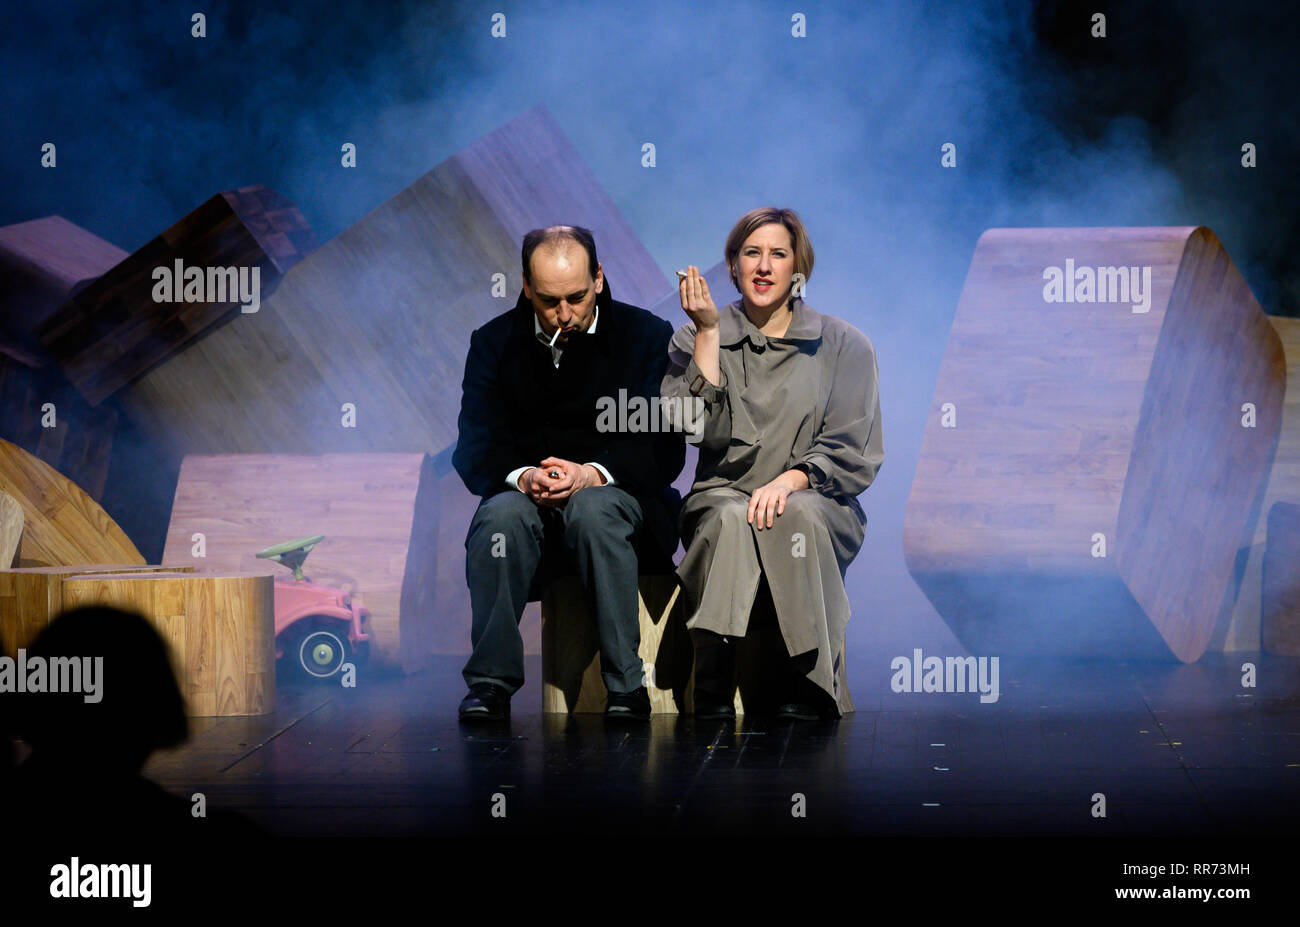 Bremen, Germany. 19th Feb, 2019. Silke Buchholz in the role of Angela Merkel in the time after her chancellorship and Markus Seuß in the role of her former driver appear during the rehearsal at the Shakespear Company in Bremen. The premiere of the play 'Angela I.' will take place on 28.02.2019. (to dpa 'play 'Angela I.' catapults post-Merkel era into now') Credit: Mohssen Assanimoghaddam/dpa/Alamy Live News Stock Photo